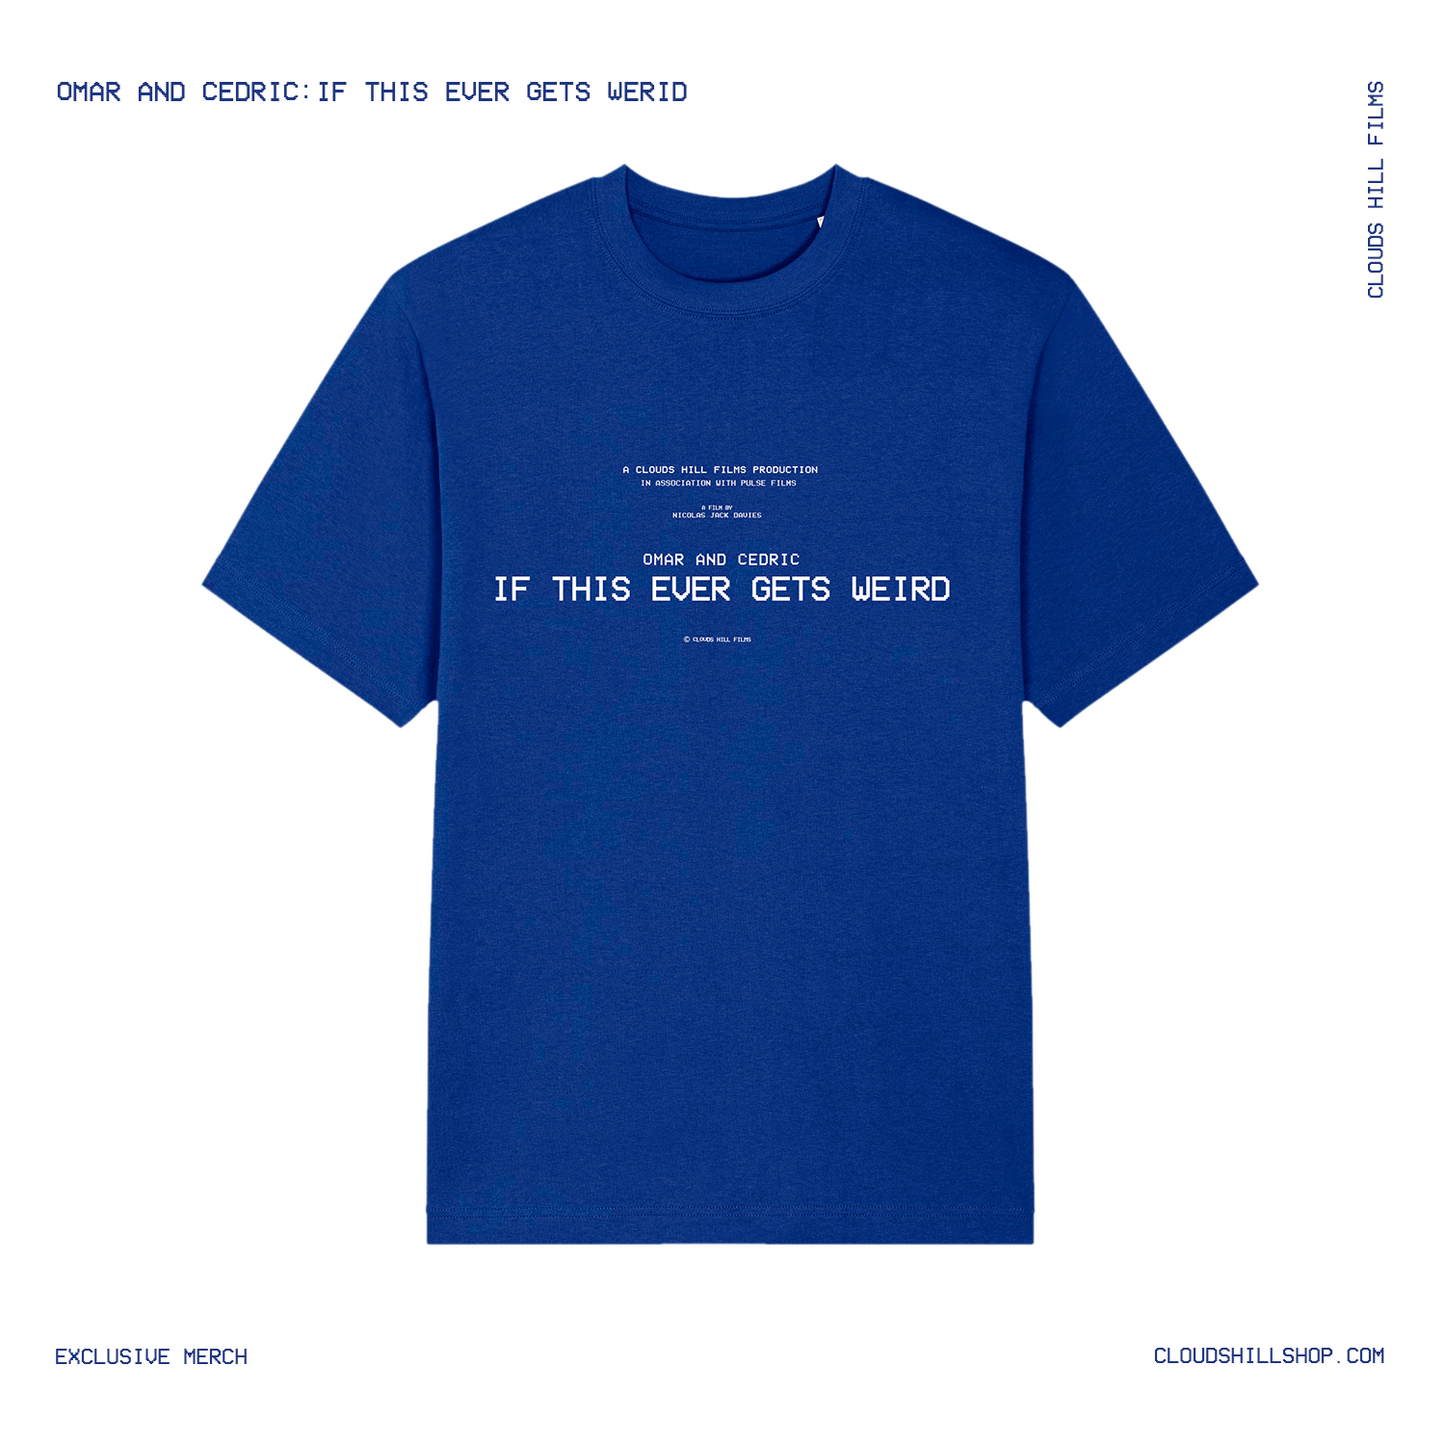 Omar and Cedric - If This Ever Gets Weird Blue T-Shirt 